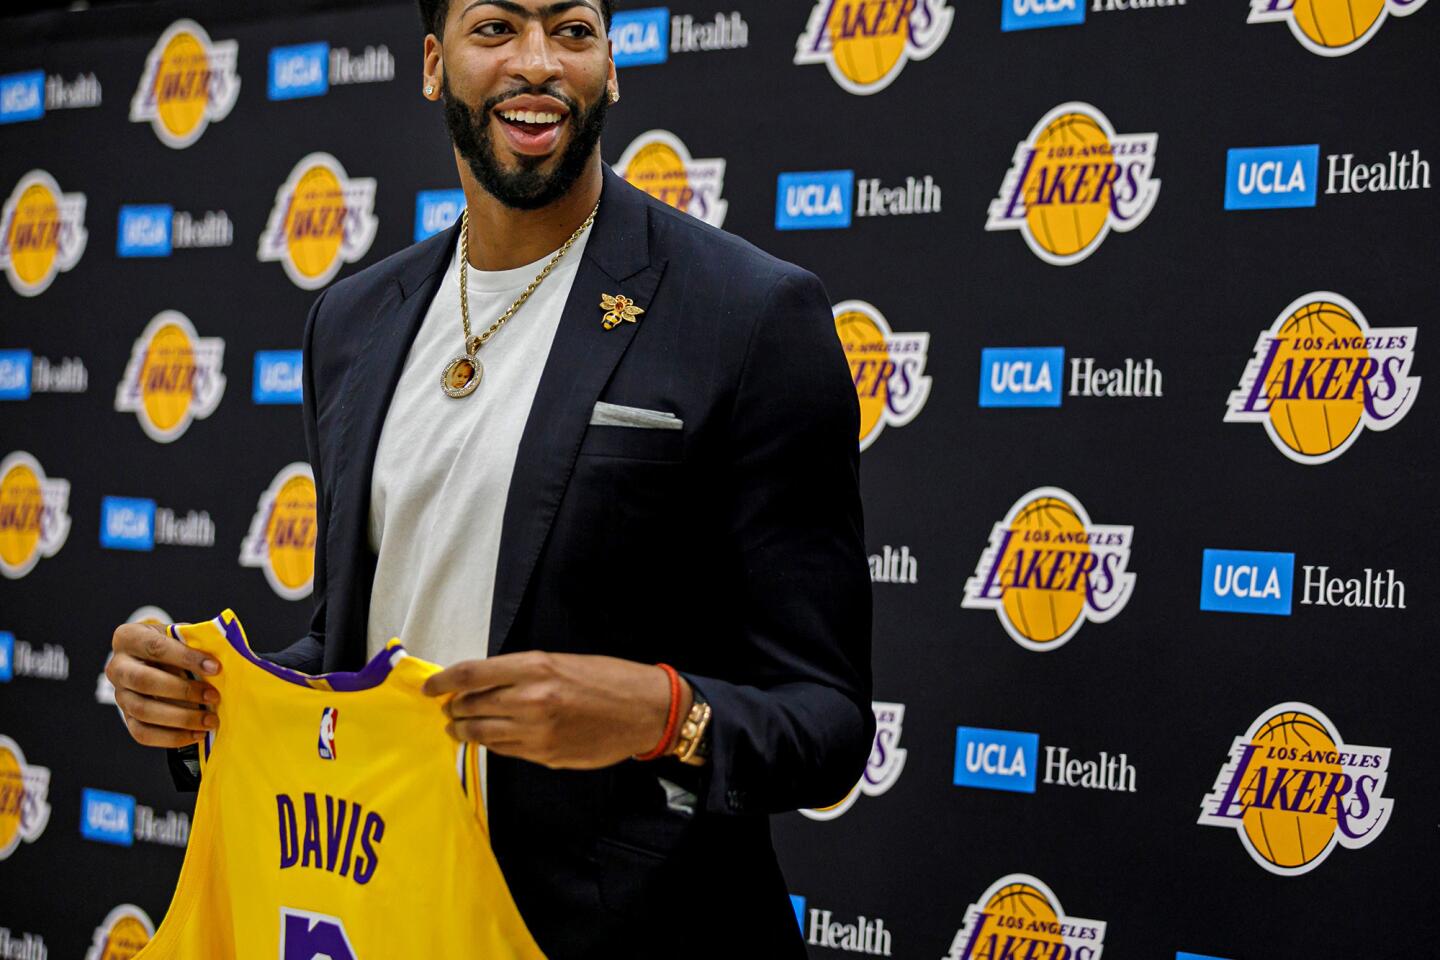 Los Angeles, California, USA. 13th July, 2019. Los Angeles Lakers NBA  basketball player Anthony Davis poses with his number 3 jersey as he is  introduced at a news conference at the UCLA